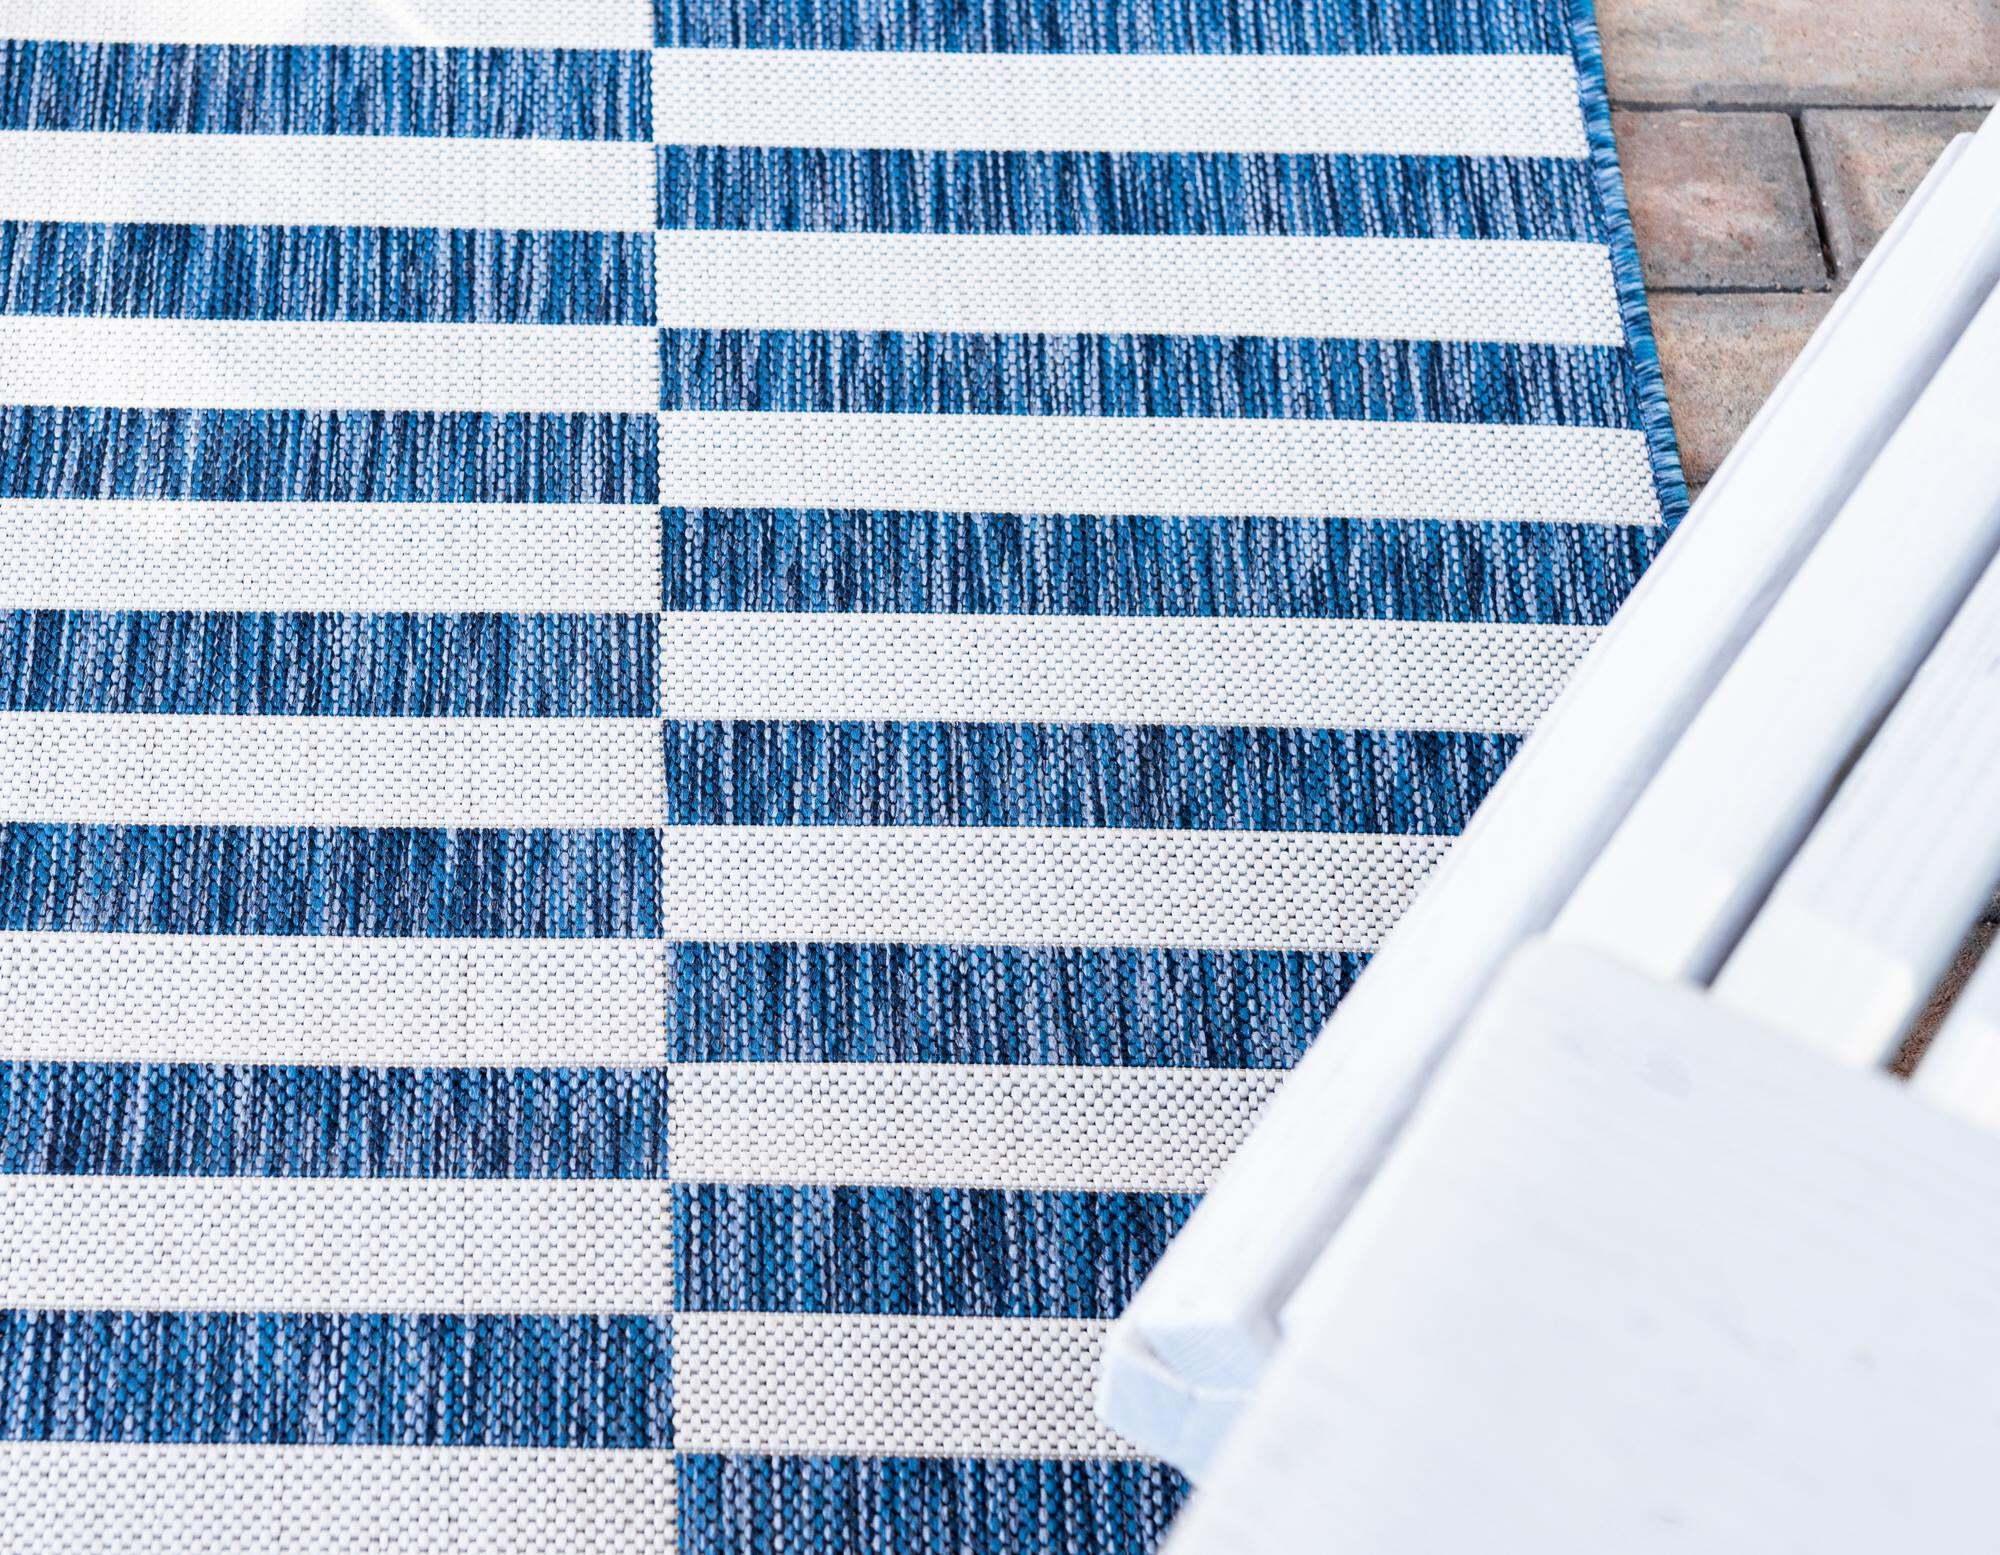 Unique Loom Outdoor Rugs - Outdoor Striped Geometric Rectangular 8x11 Rug Navy Blue & Ivory